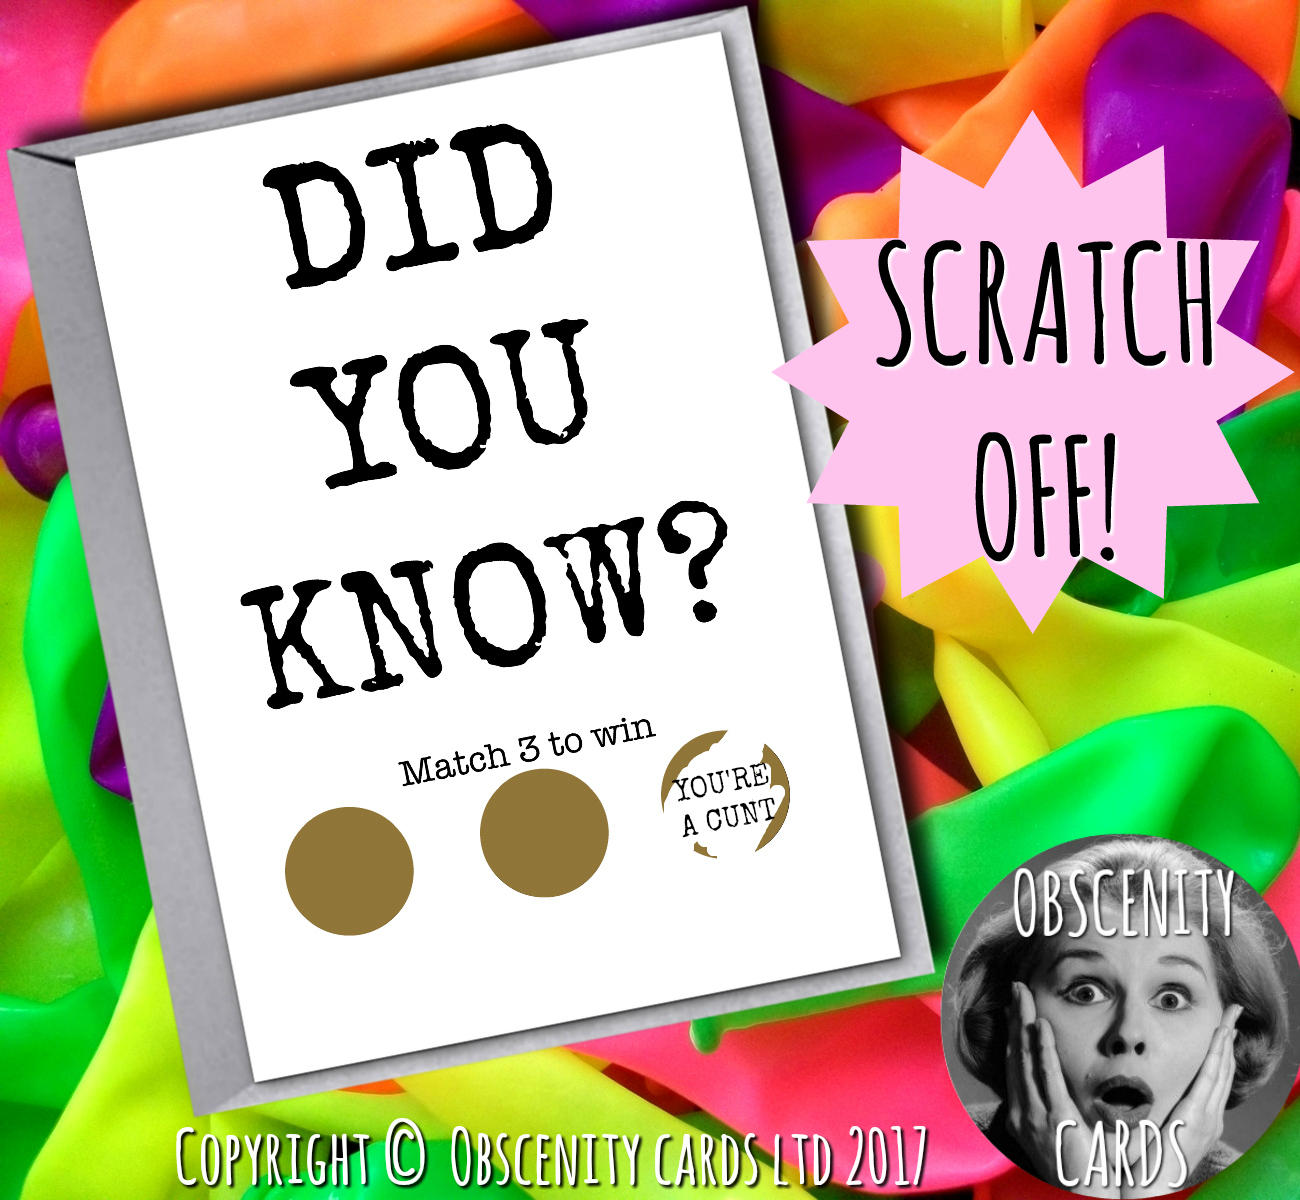 NEW SCRATCH-OFF CARDS! DID YOU KNOW? YOU'RE A CUNT